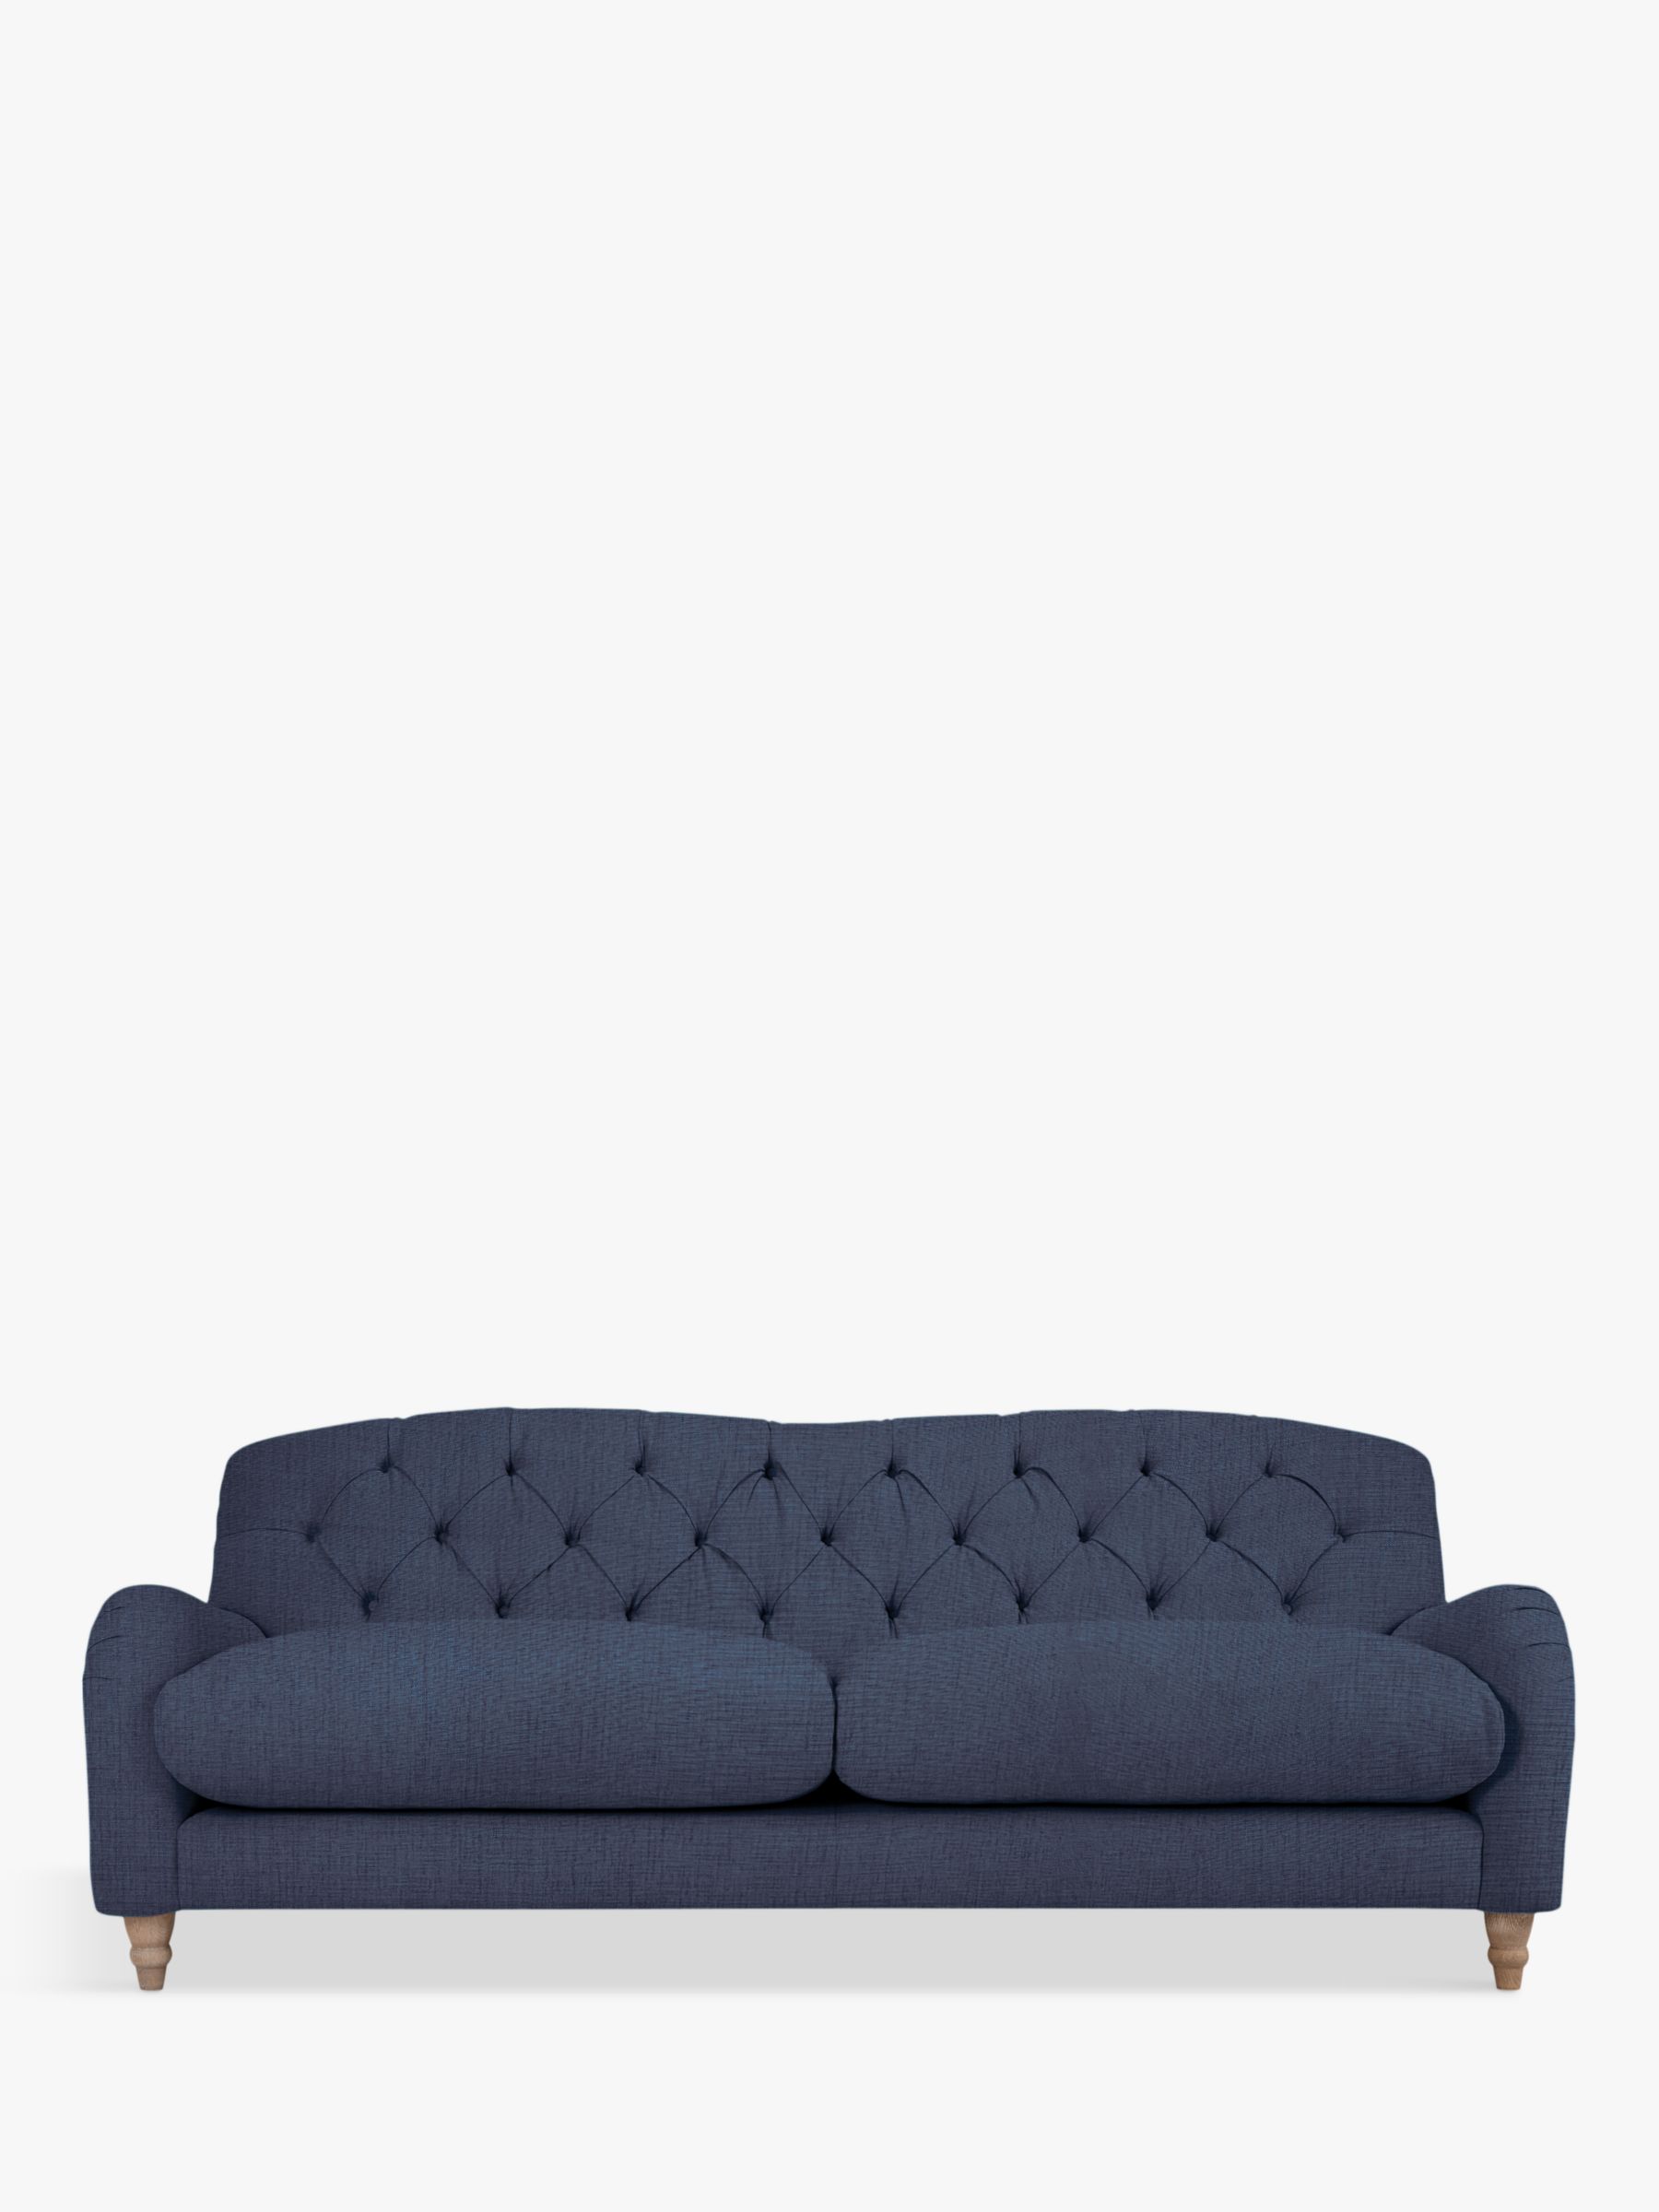 Crumble Large 3 Seater Sofa by Loaf at John Lewis